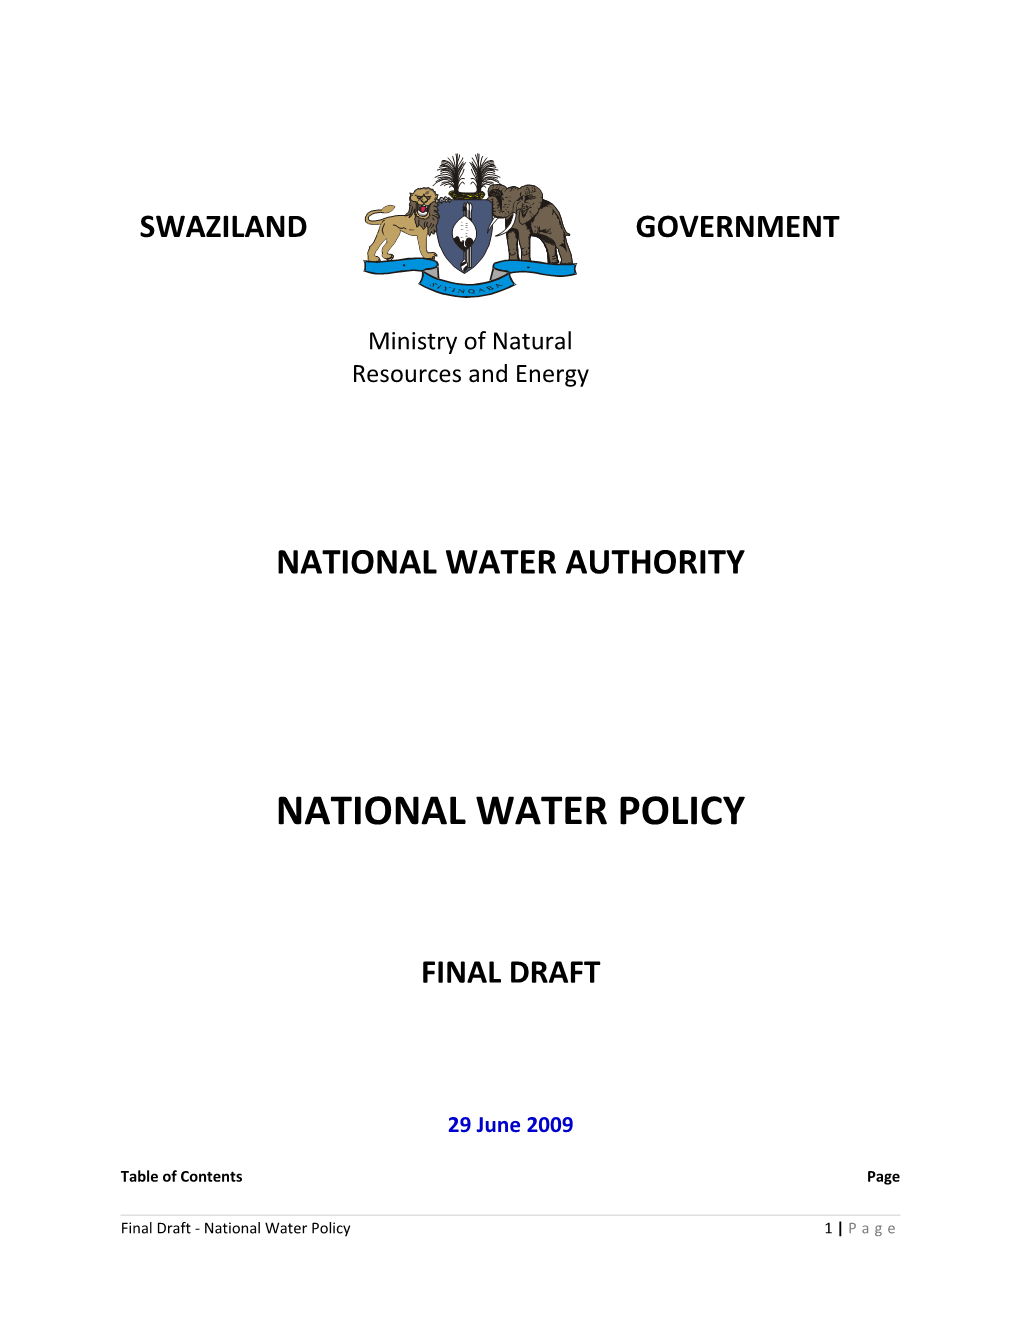 National Water Authority